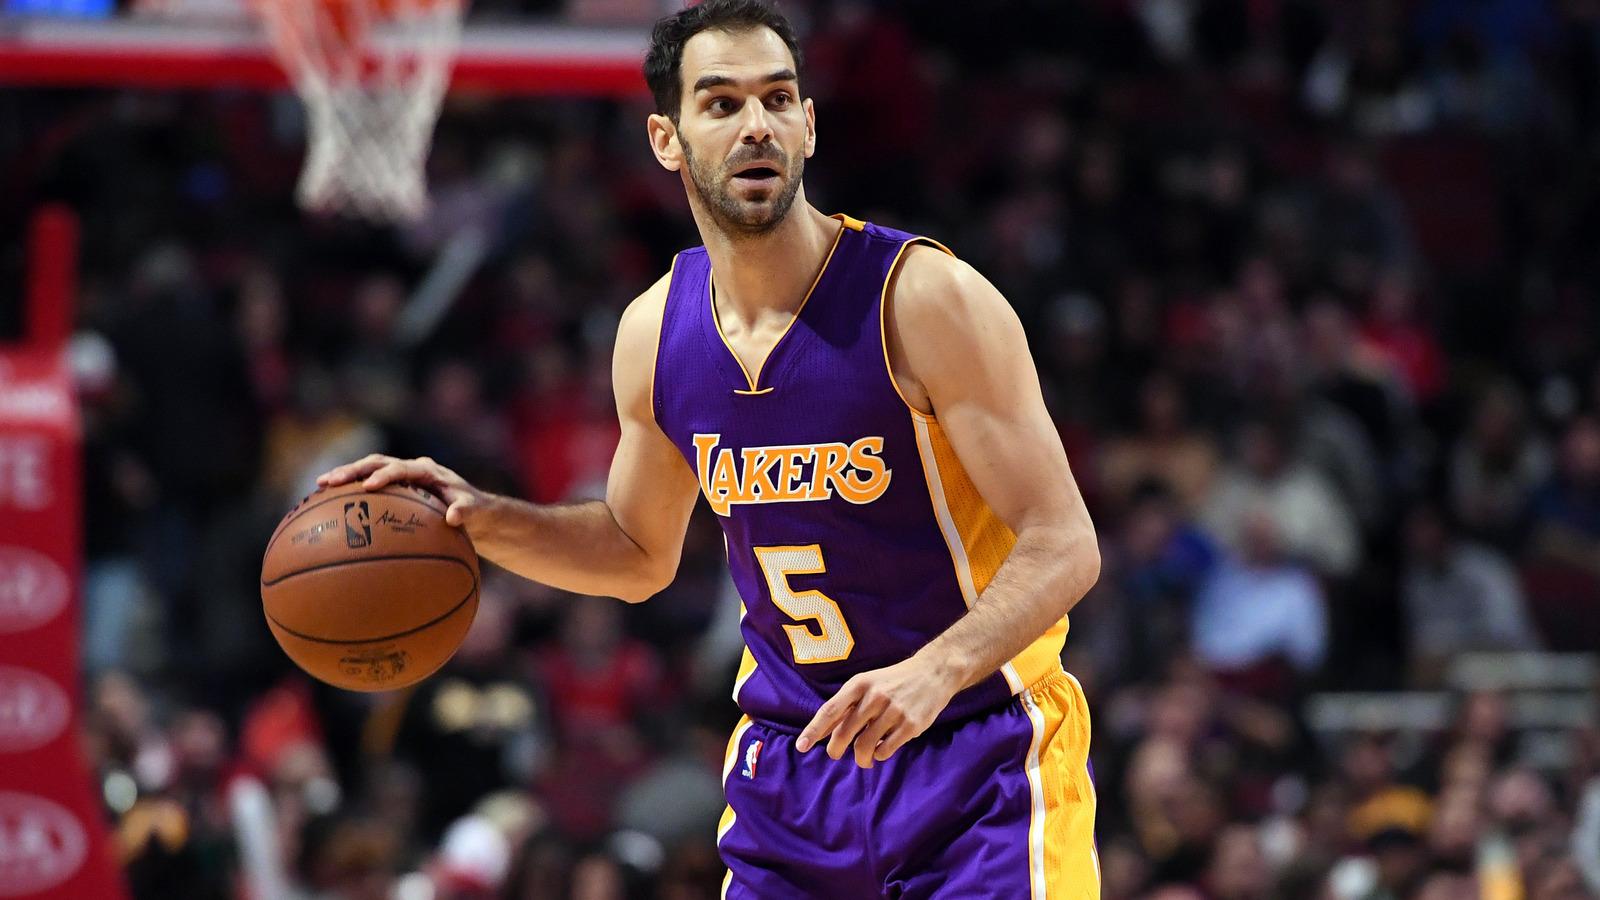 Jose Calderon earned over $400K in two hours with Warriors